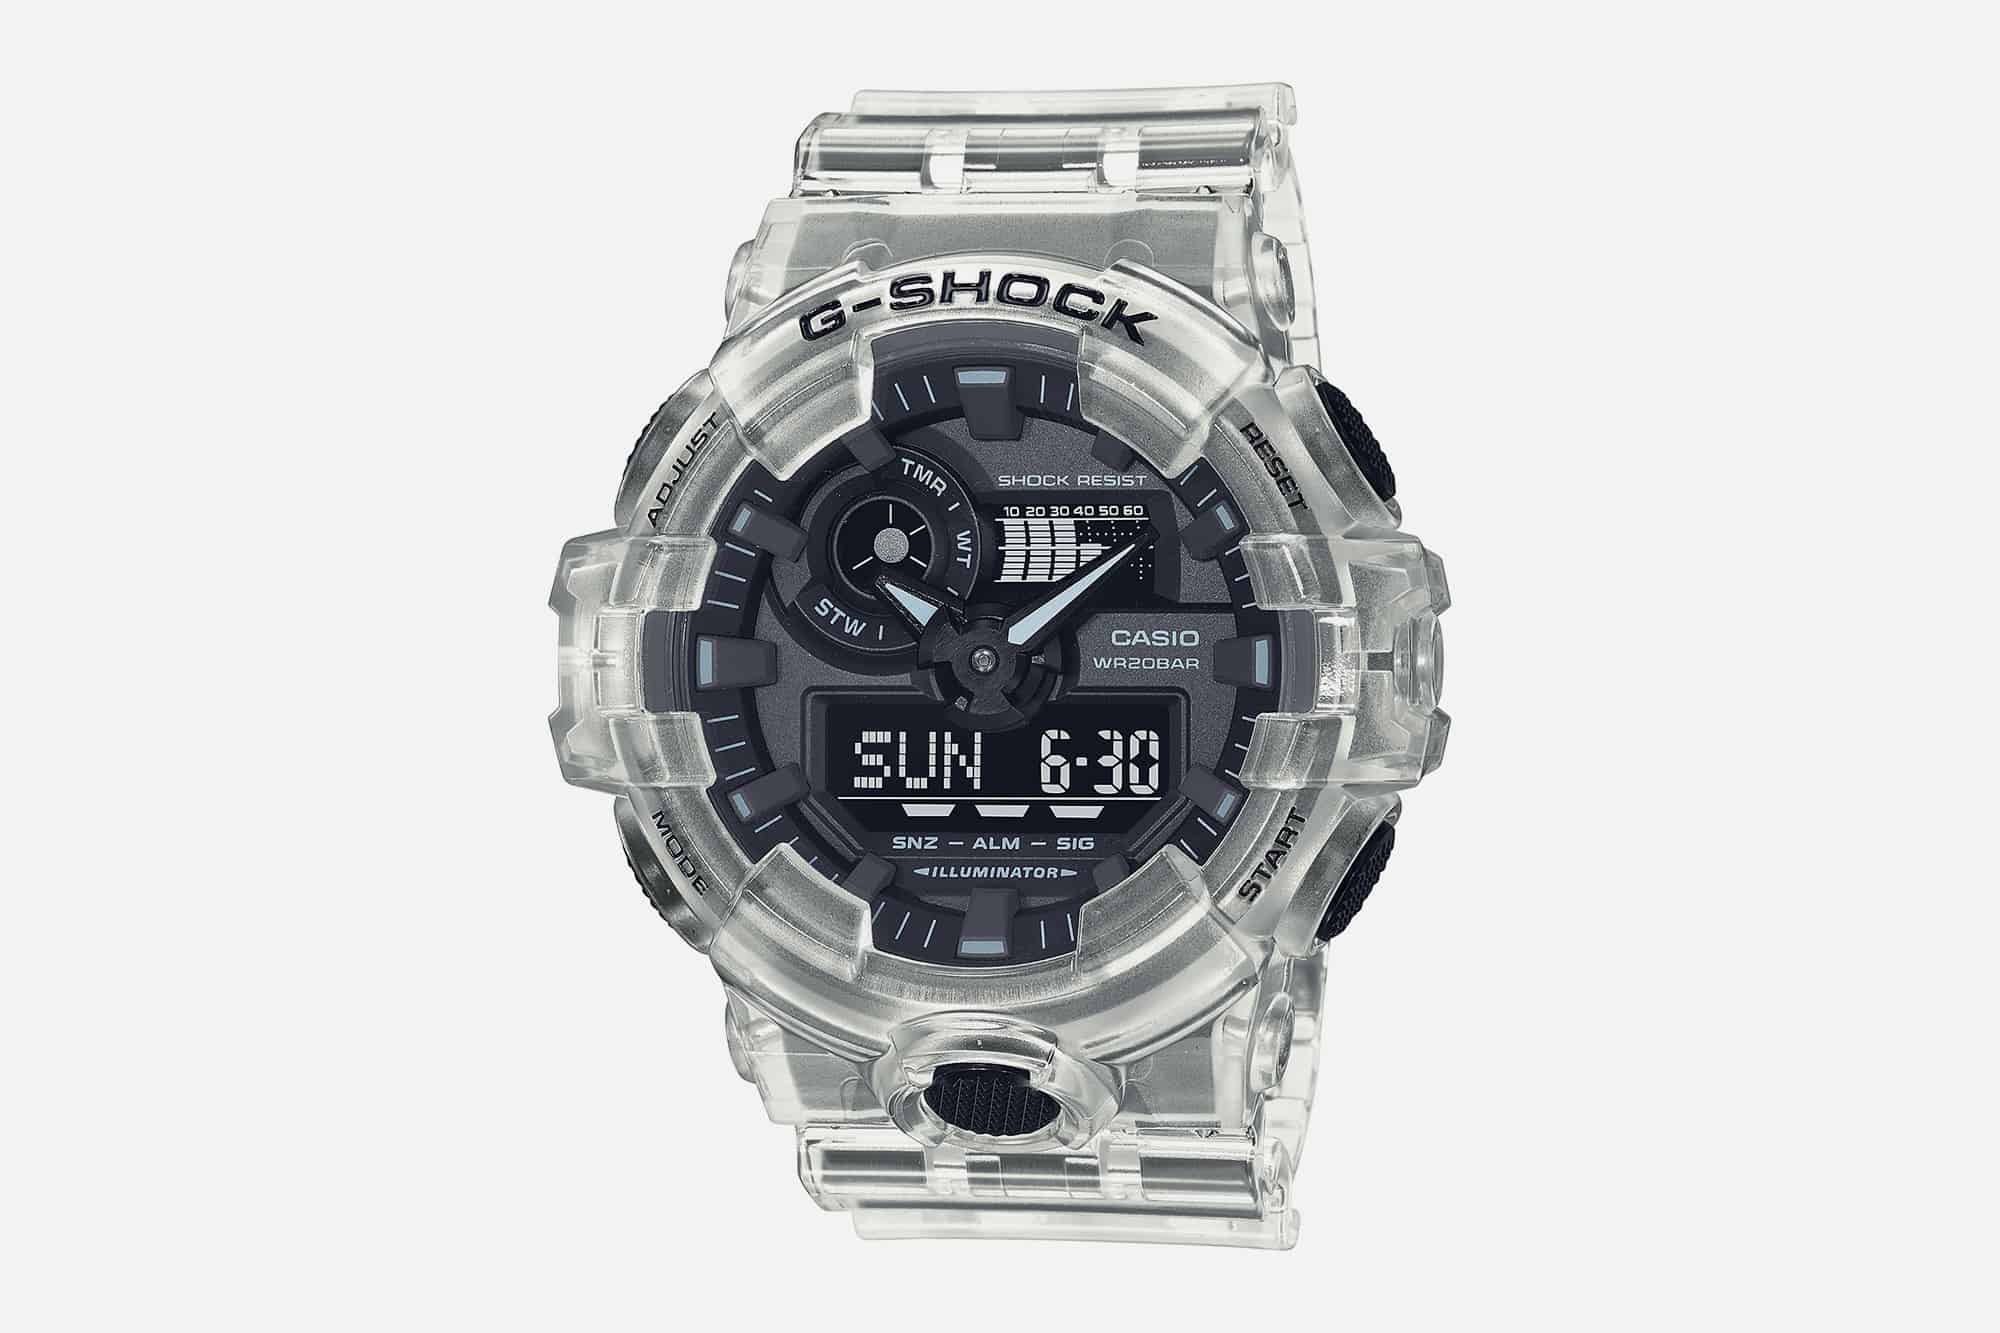 G-Shock Goes Transparent with Six Models - Worn & Wound